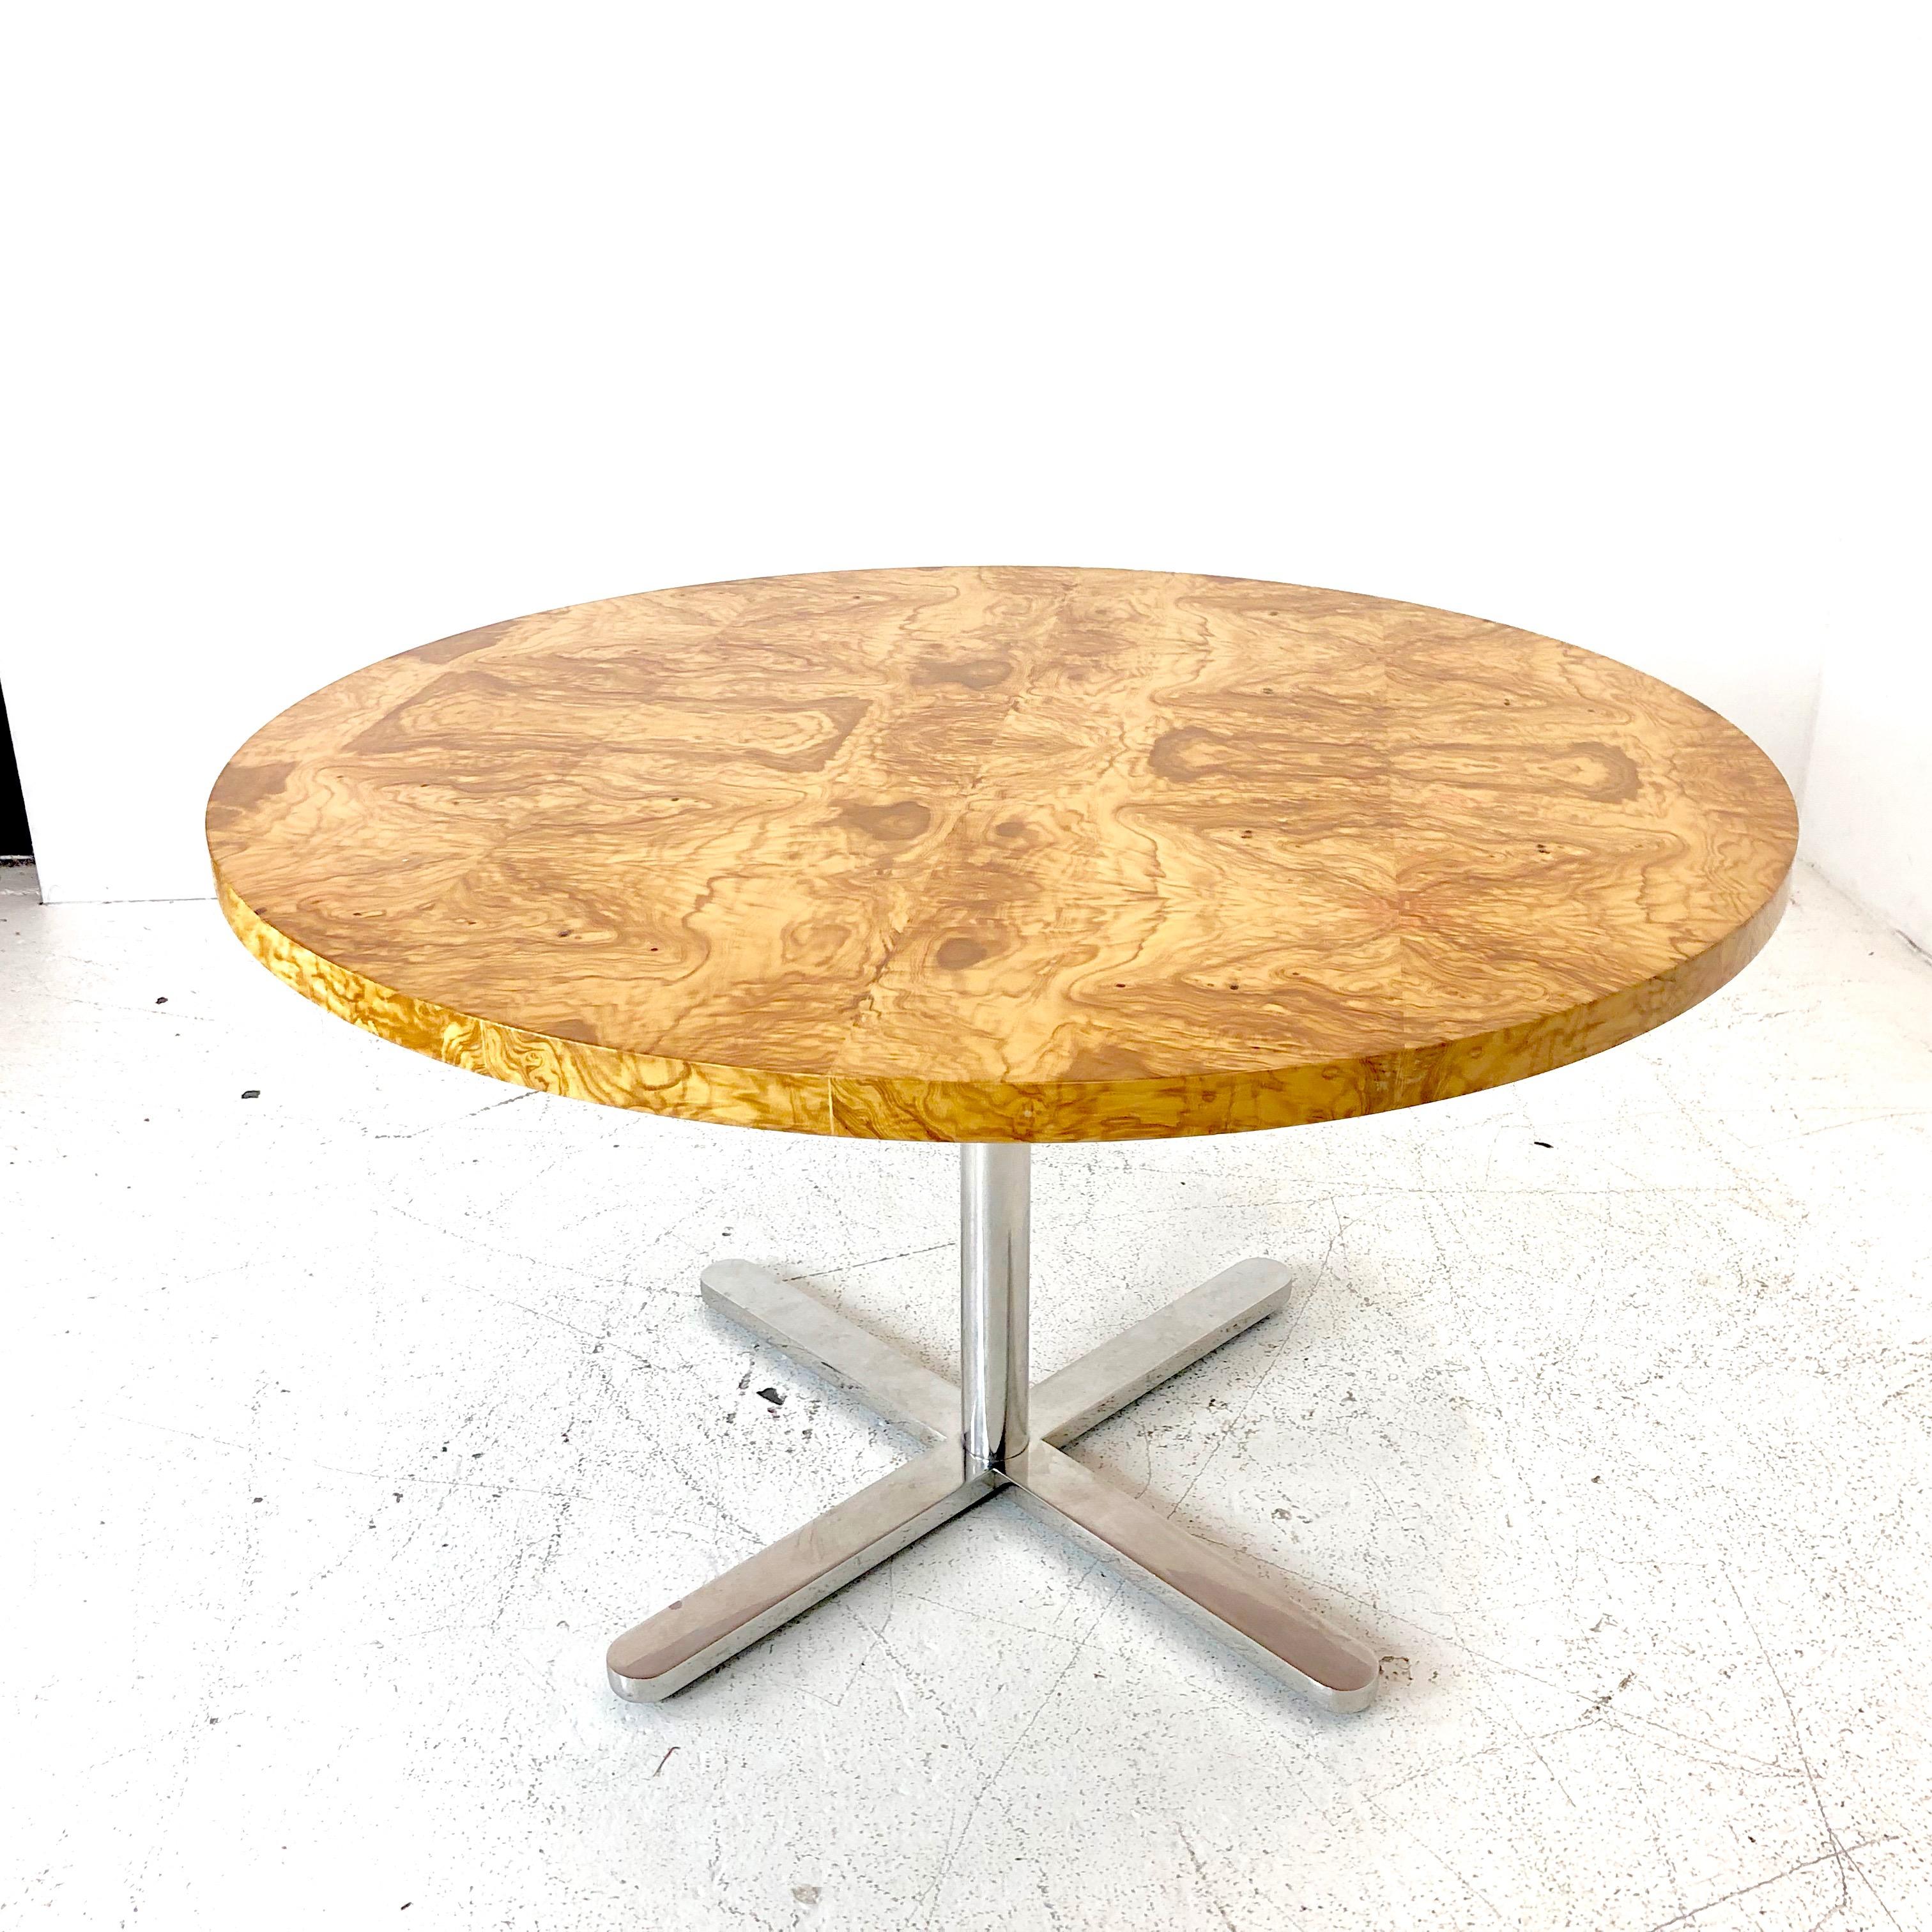 Round burl wood dining table with star pedestal base. Dining table is in good condition with some discoloration in the tables veneer and minor chipping around perimeter of the tabletop.
Dimensions:
48 diameter x 28.5 height.